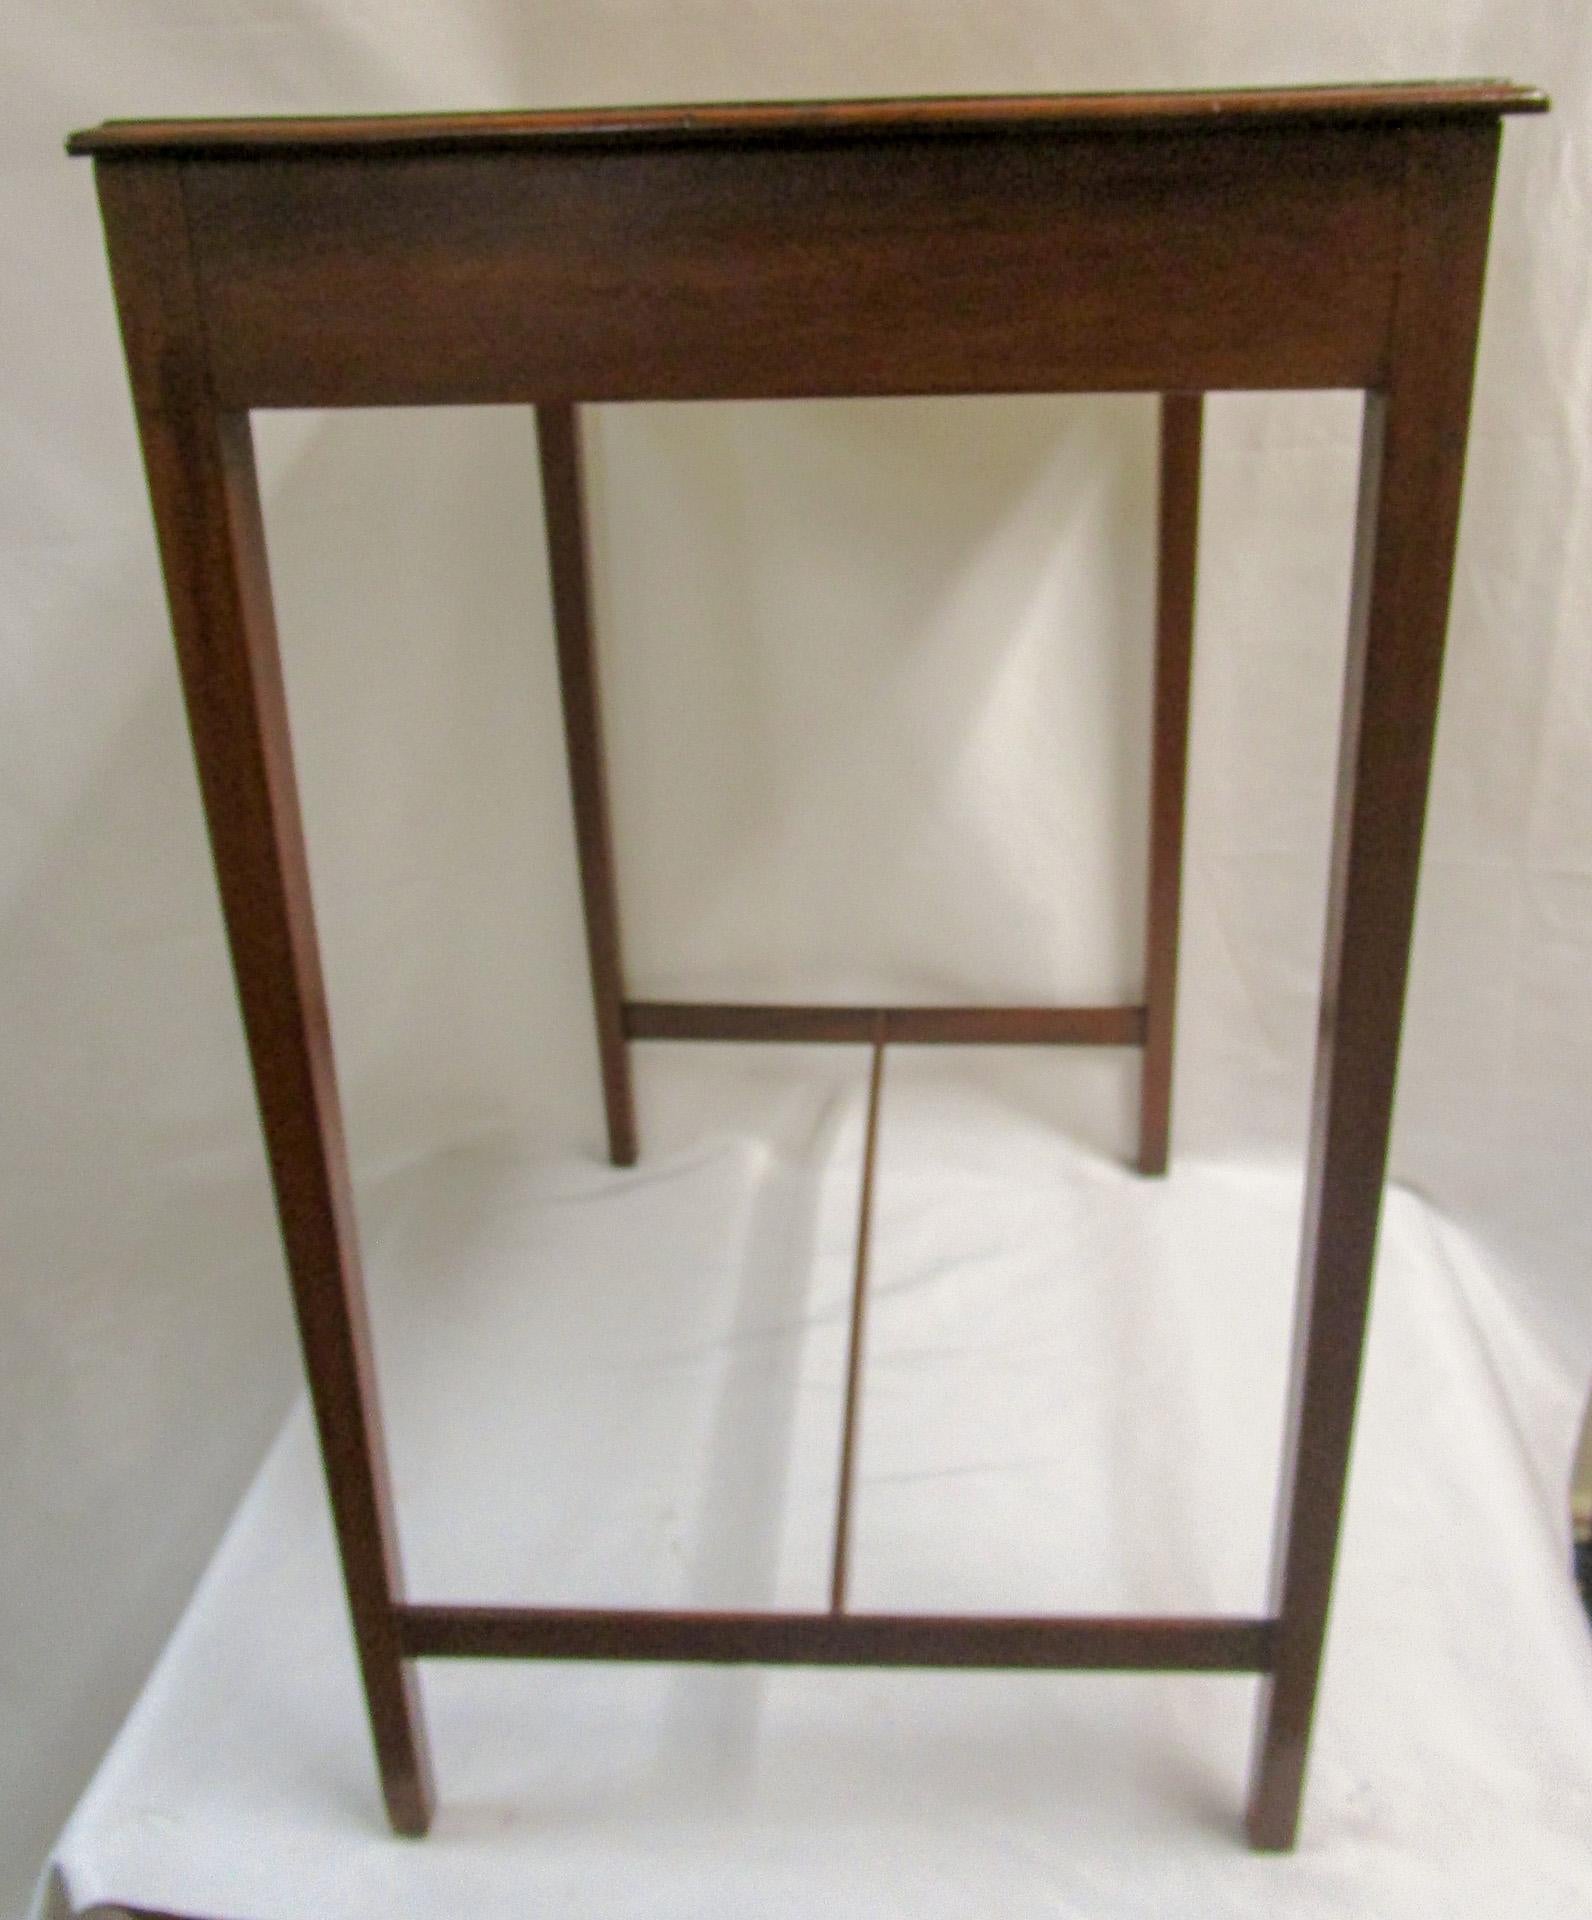 English Hepplewhite Mahogany Side Table w/ Shell Motif Inlay in Center & Corners 1